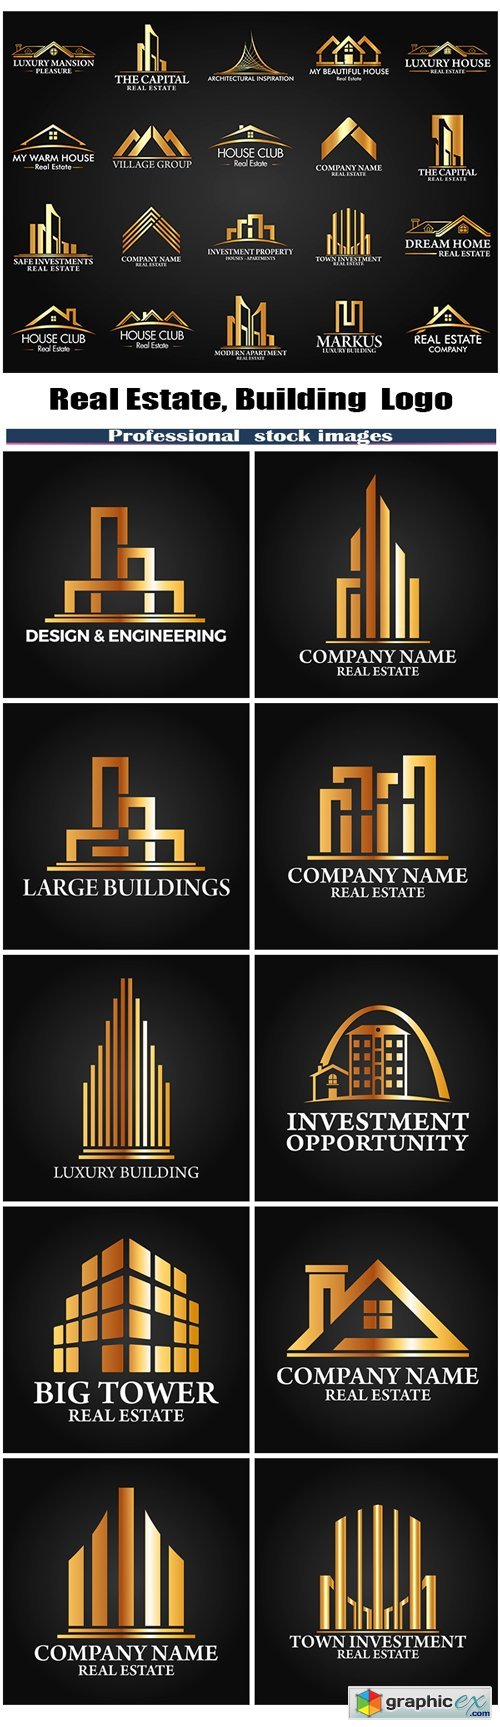 Real Estate, Building and Investment Logo #2